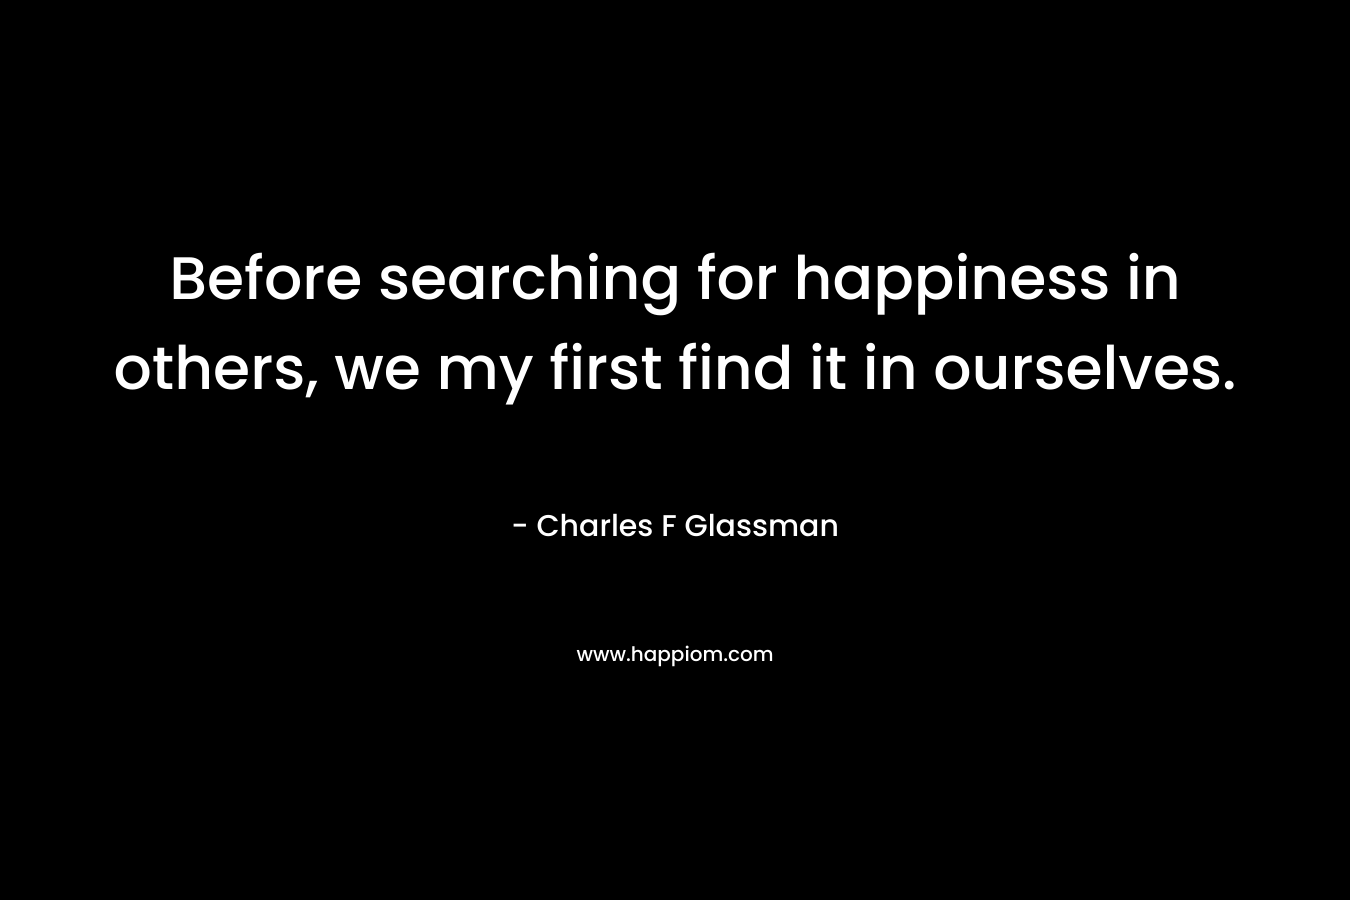 Before searching for happiness in others, we my first find it in ourselves.